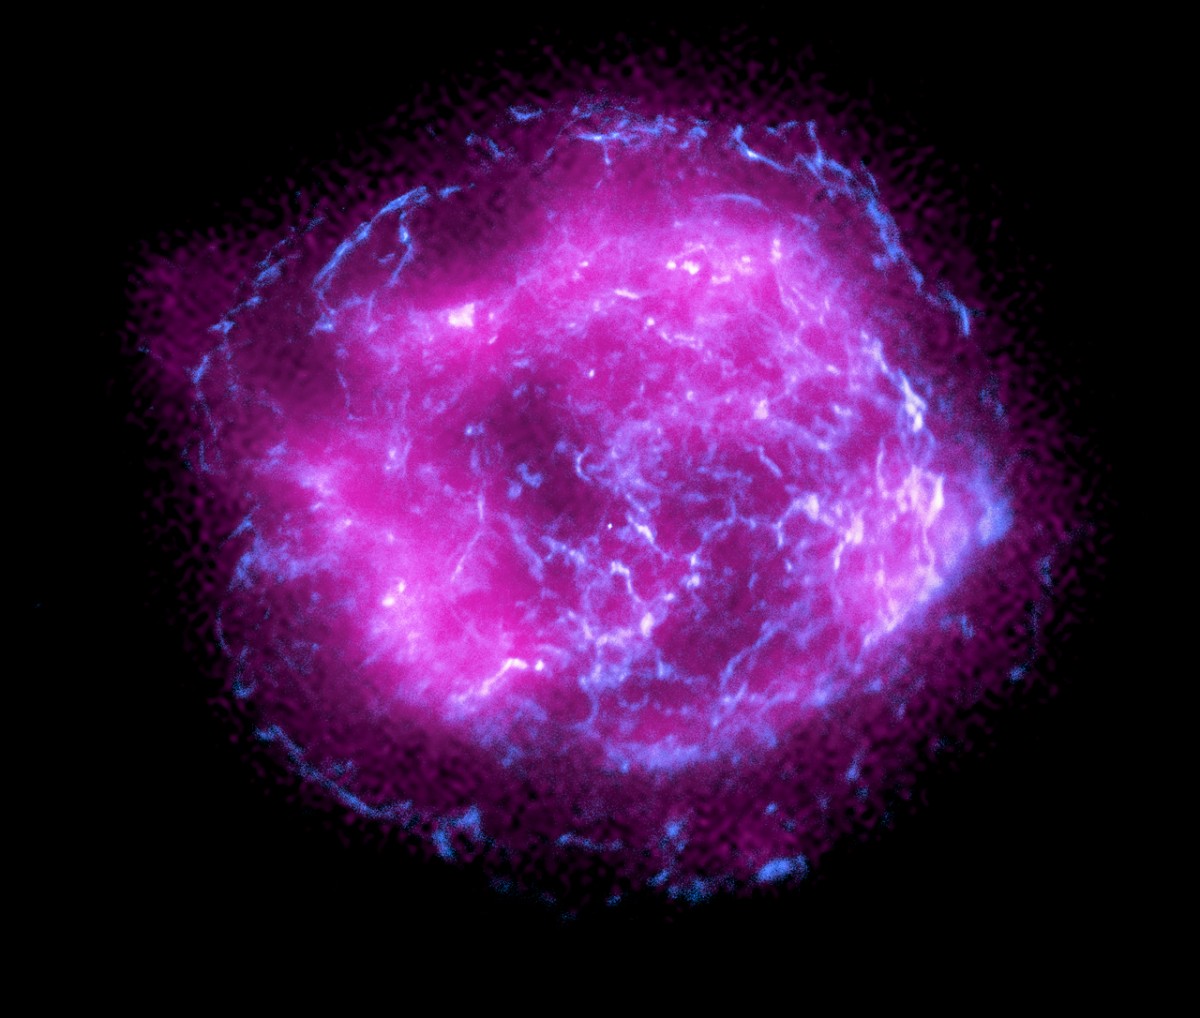 “In this observation of radiation from a faraway celestial object, we see a beautiful effect that is a manifestation of intricate, fundamental physics.” @CornellAstro professor Dong Lai tests quantum electrodynamics in a neutron star with a magnetic field as.cornell.edu/news/neutron-s…